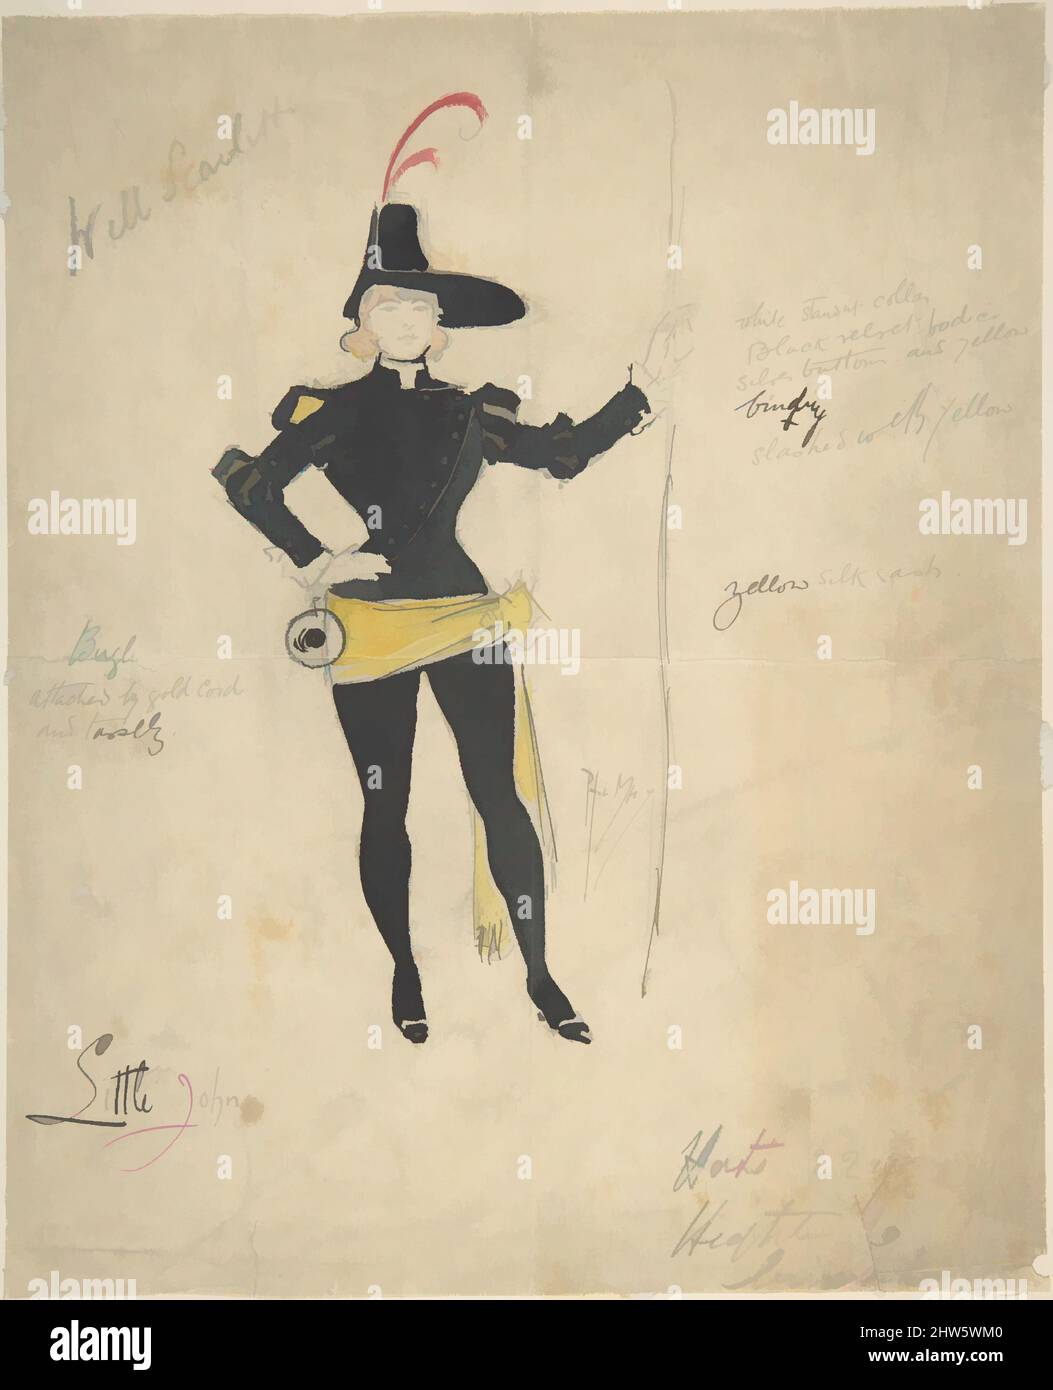 Art inspired by Costume Drawing for Little John, late 19th century, Pen, brush and black ink, watercolor over graphite, sheet: 8 3/16 x 6 3/4 in. (20.8 x 17.1 cm), Phil May (British, New Wortley, Leeds 1864–1903 London, Classic works modernized by Artotop with a splash of modernity. Shapes, color and value, eye-catching visual impact on art. Emotions through freedom of artworks in a contemporary way. A timeless message pursuing a wildly creative new direction. Artists turning to the digital medium and creating the Artotop NFT Stock Photo